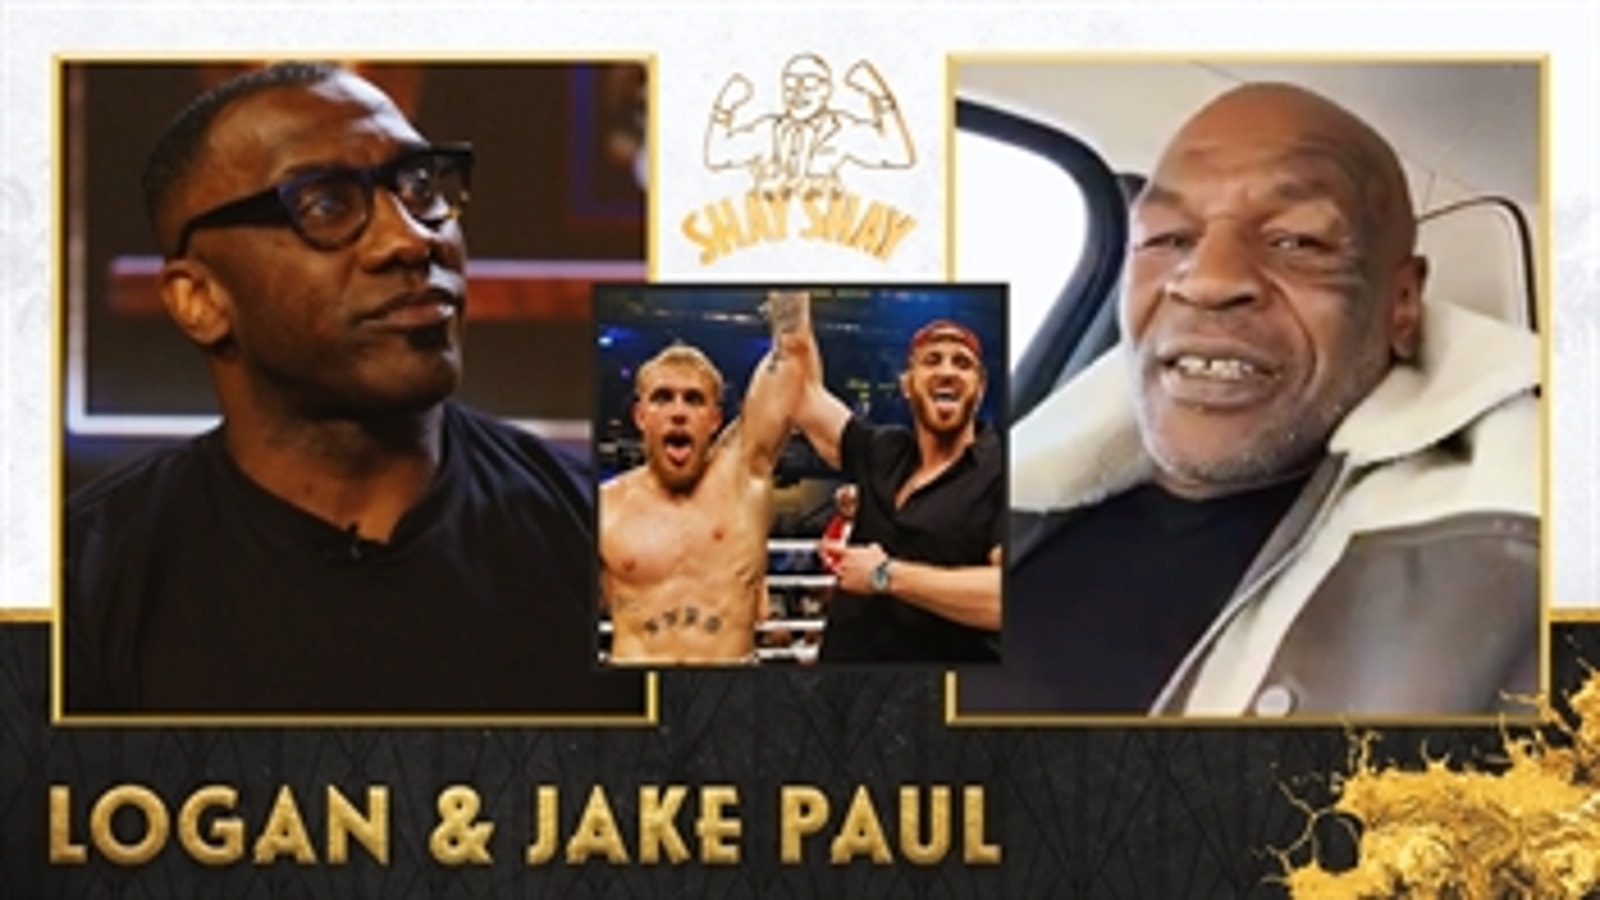 Mike Tyson: Logan & Jake Paul are good for boxing